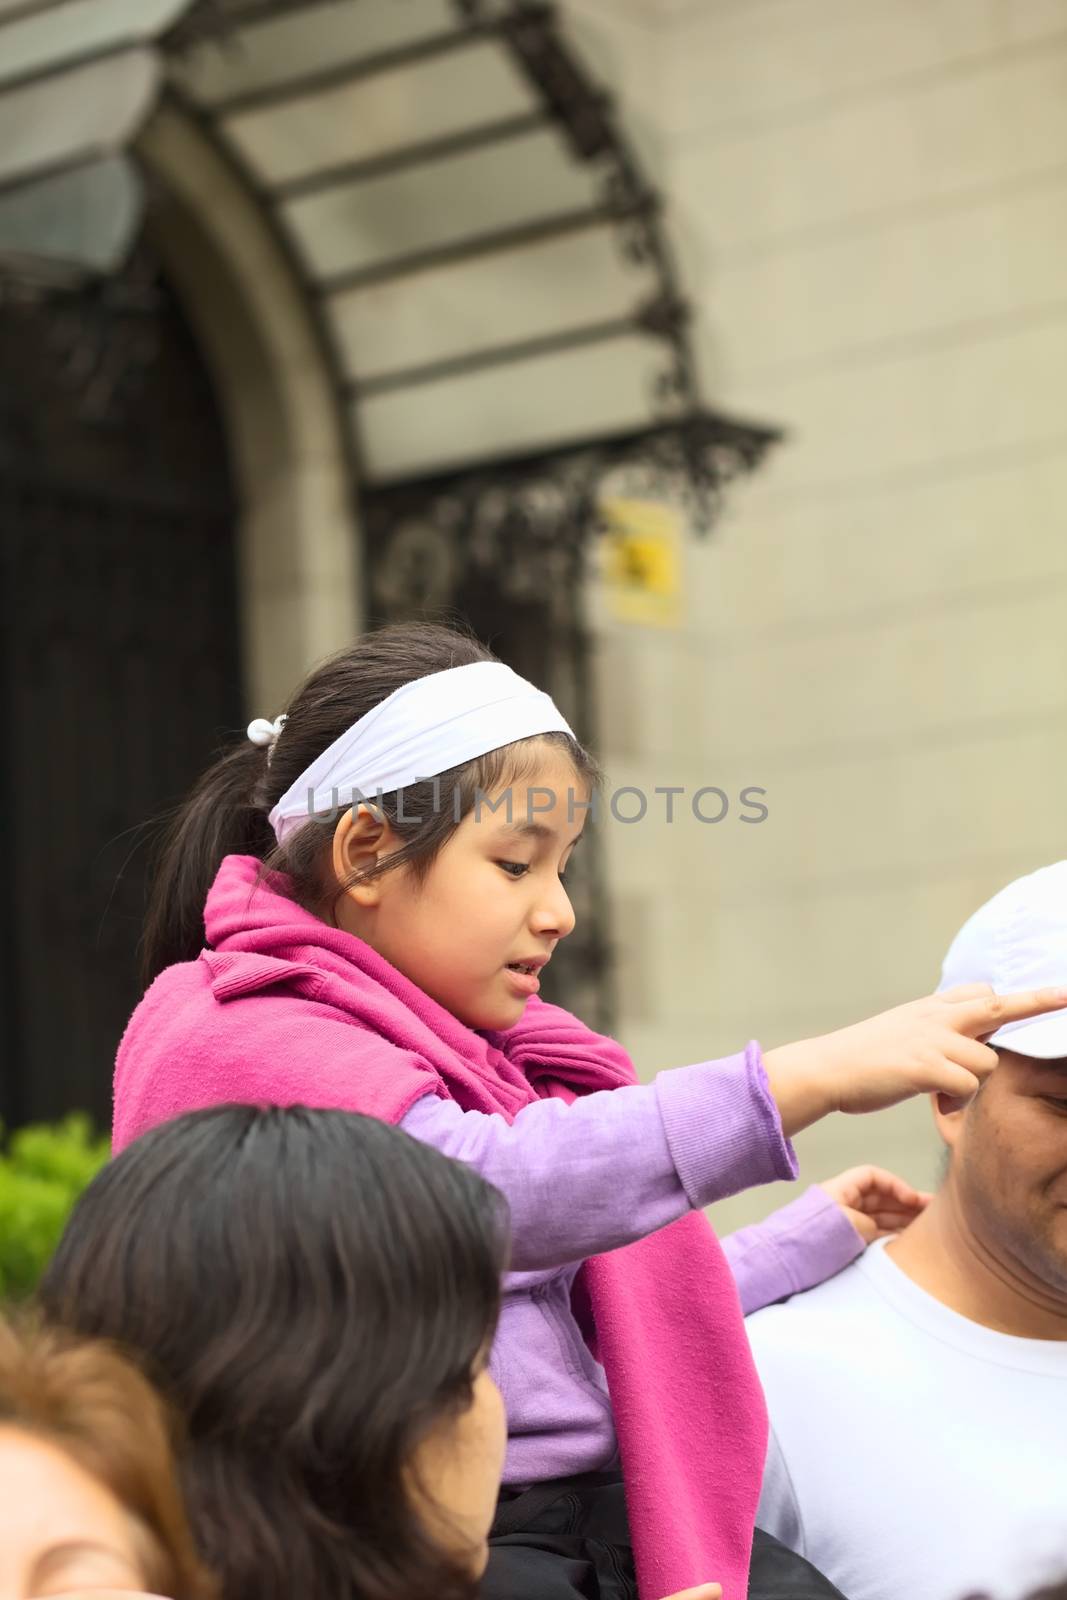 LIMA, PERU - JULY 21, 2013: Unidentified young girl pointing on the Wong Parade in Miraflores on July 21, 2013 in Lima, Peru. The Parade (Gran Corso de Wong) is a traditional parade to celebrate the Peruvian national holiday which is on July 28-29. 